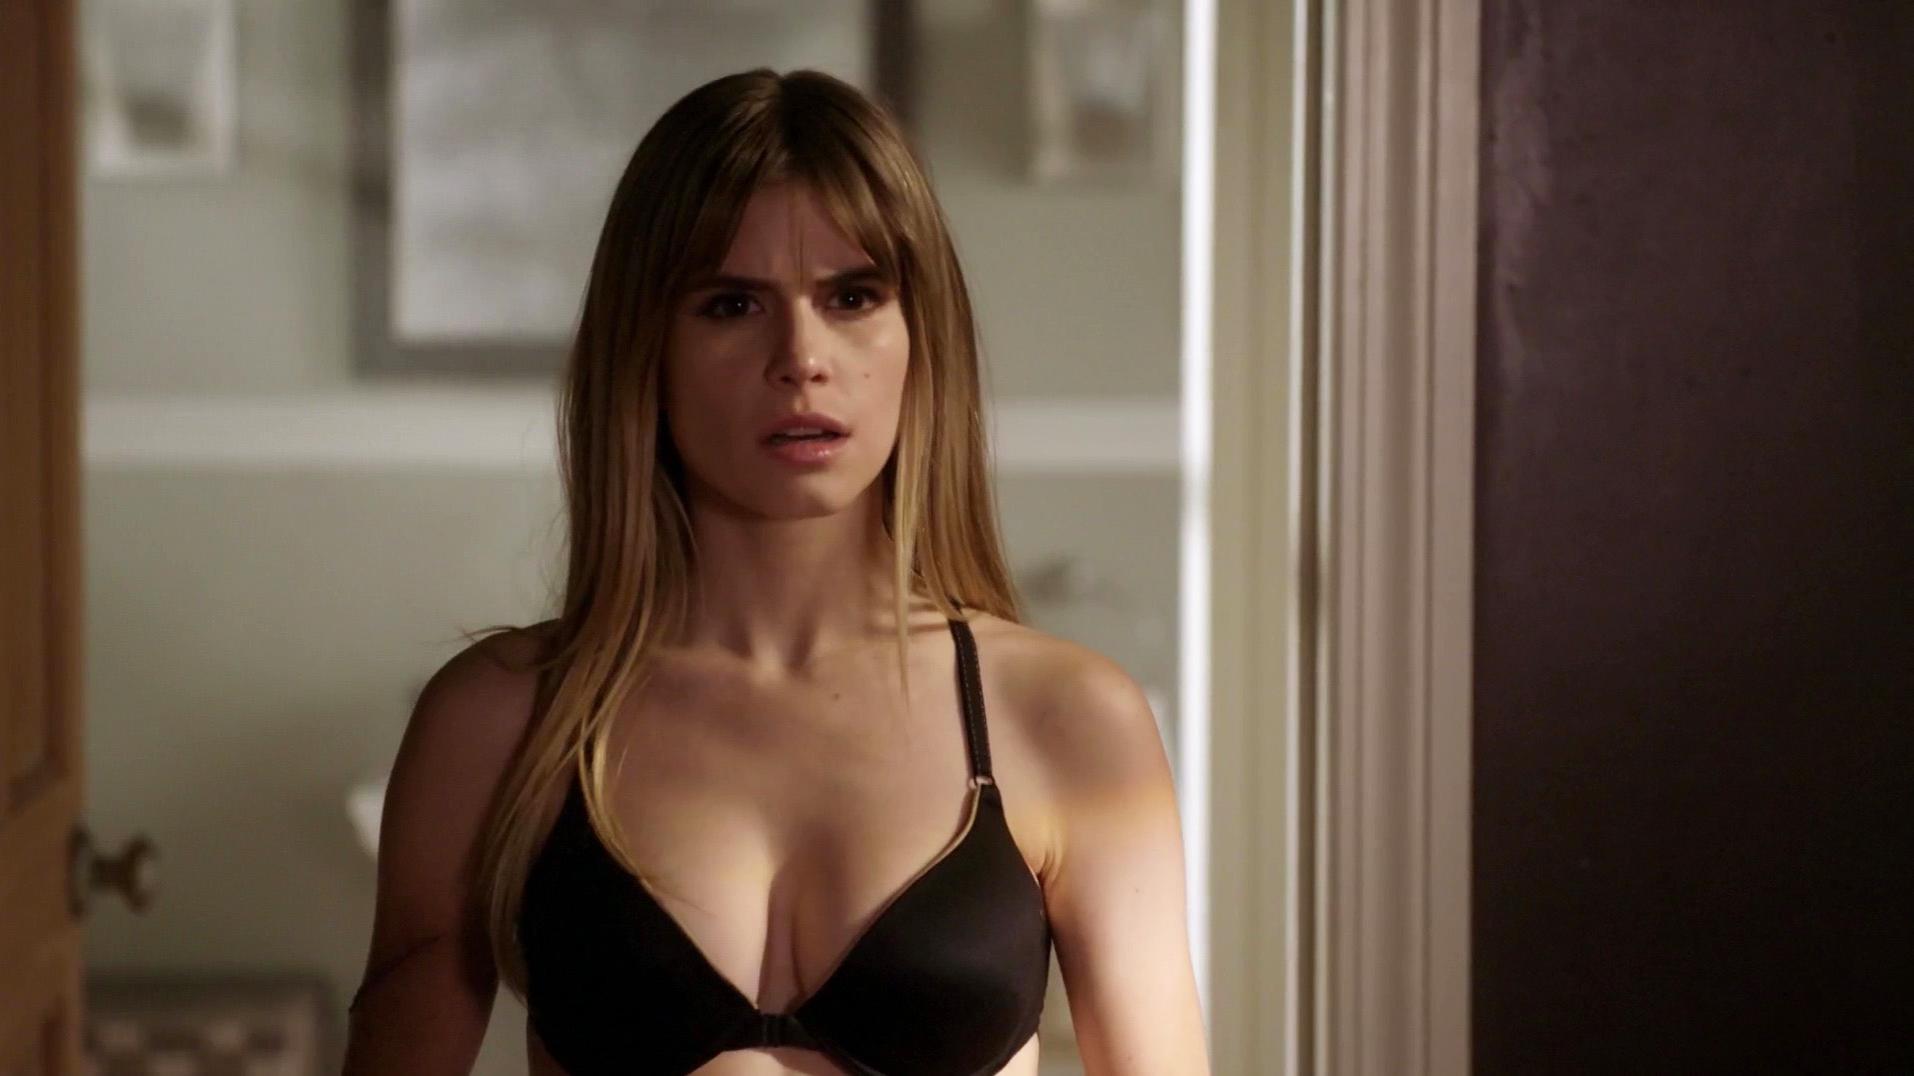 Carlson young nudes